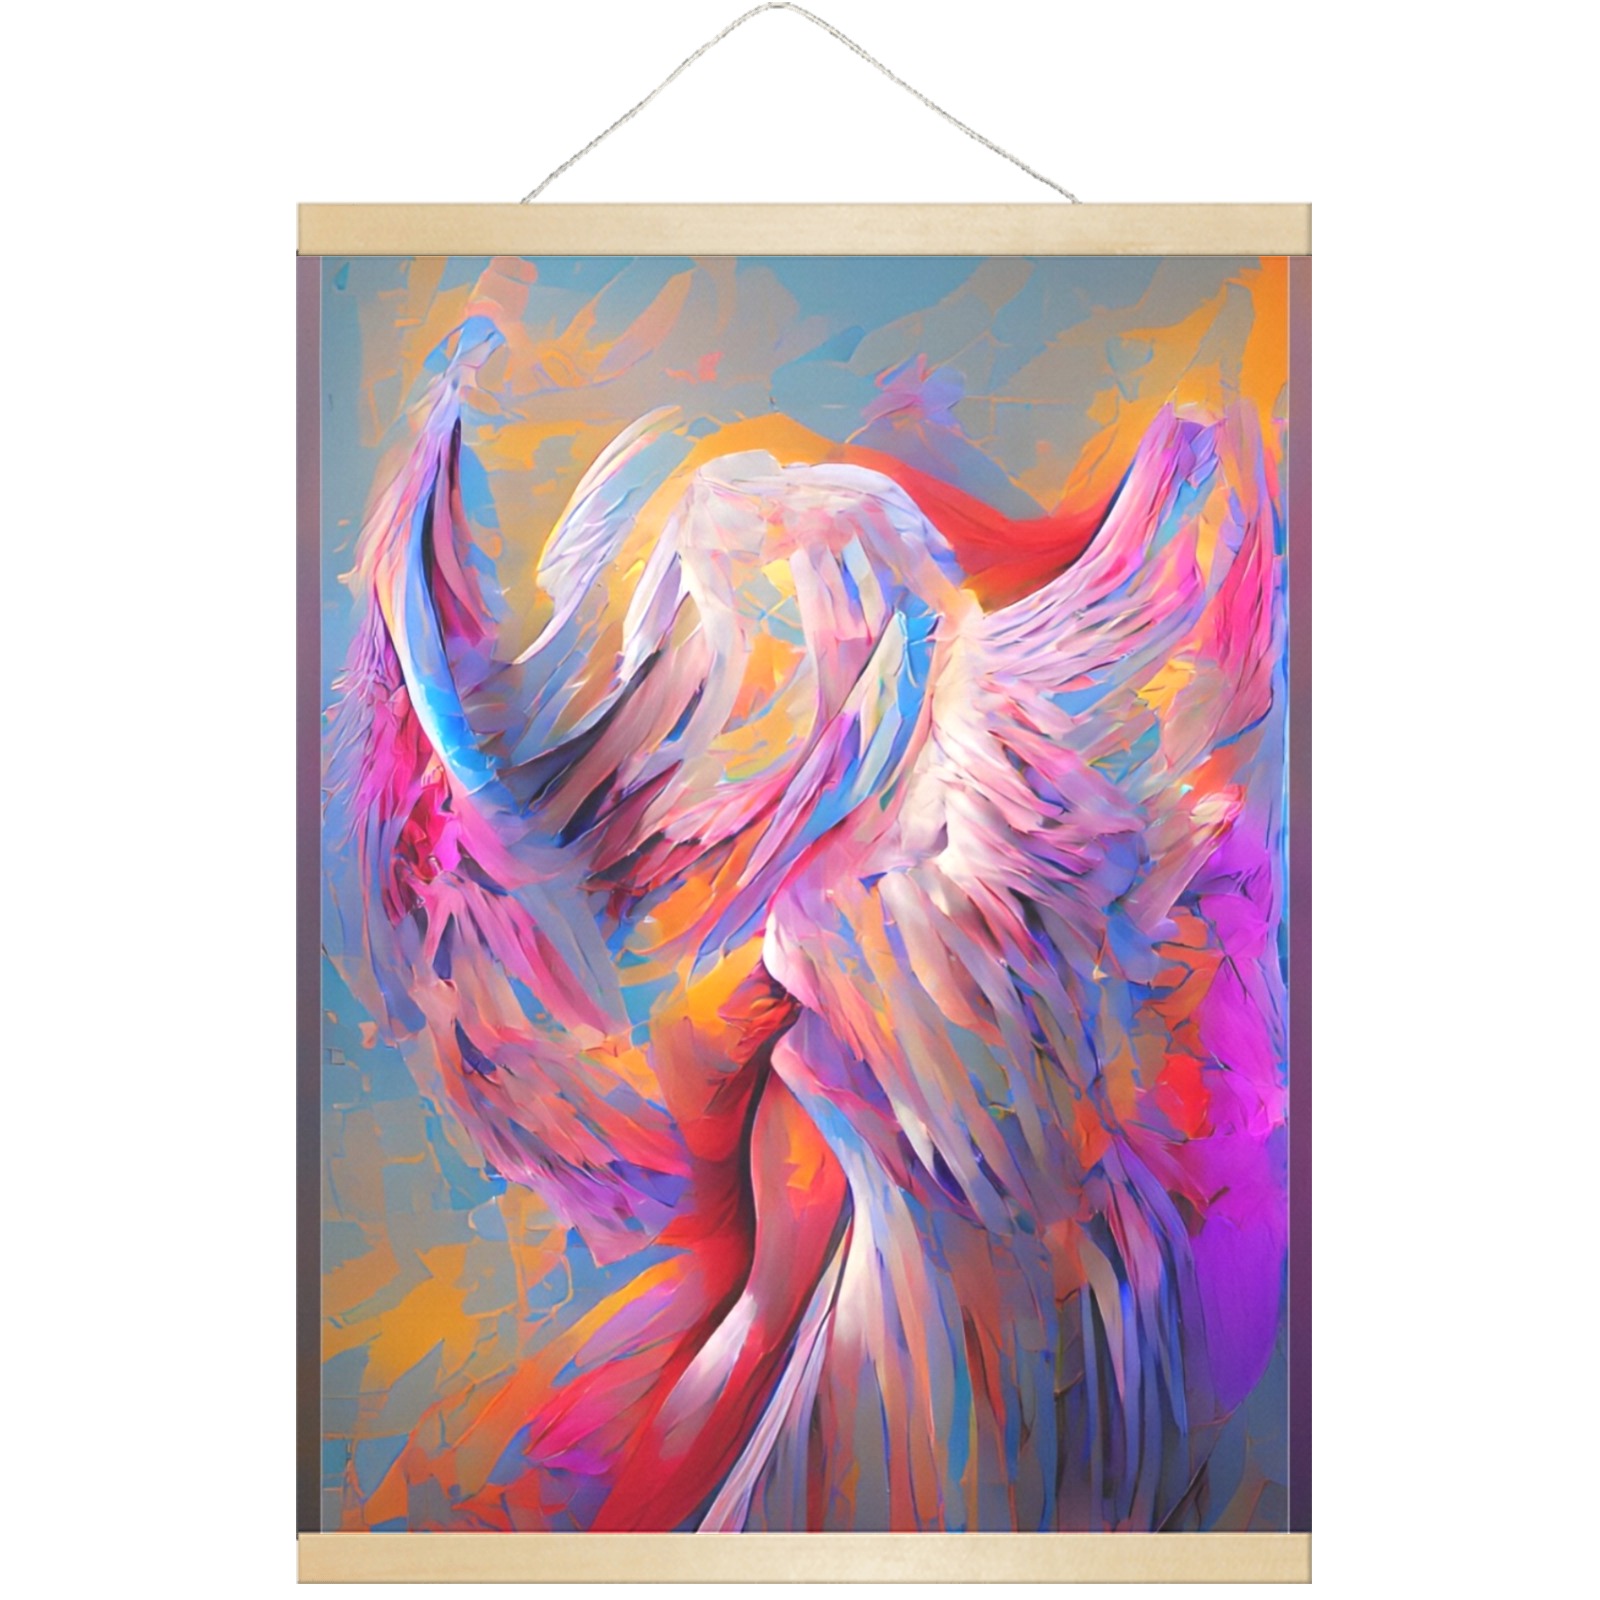 I_WISH_I_WAS_YOUR_ANGEL_TradingCard Hanging Poster 18"x24"